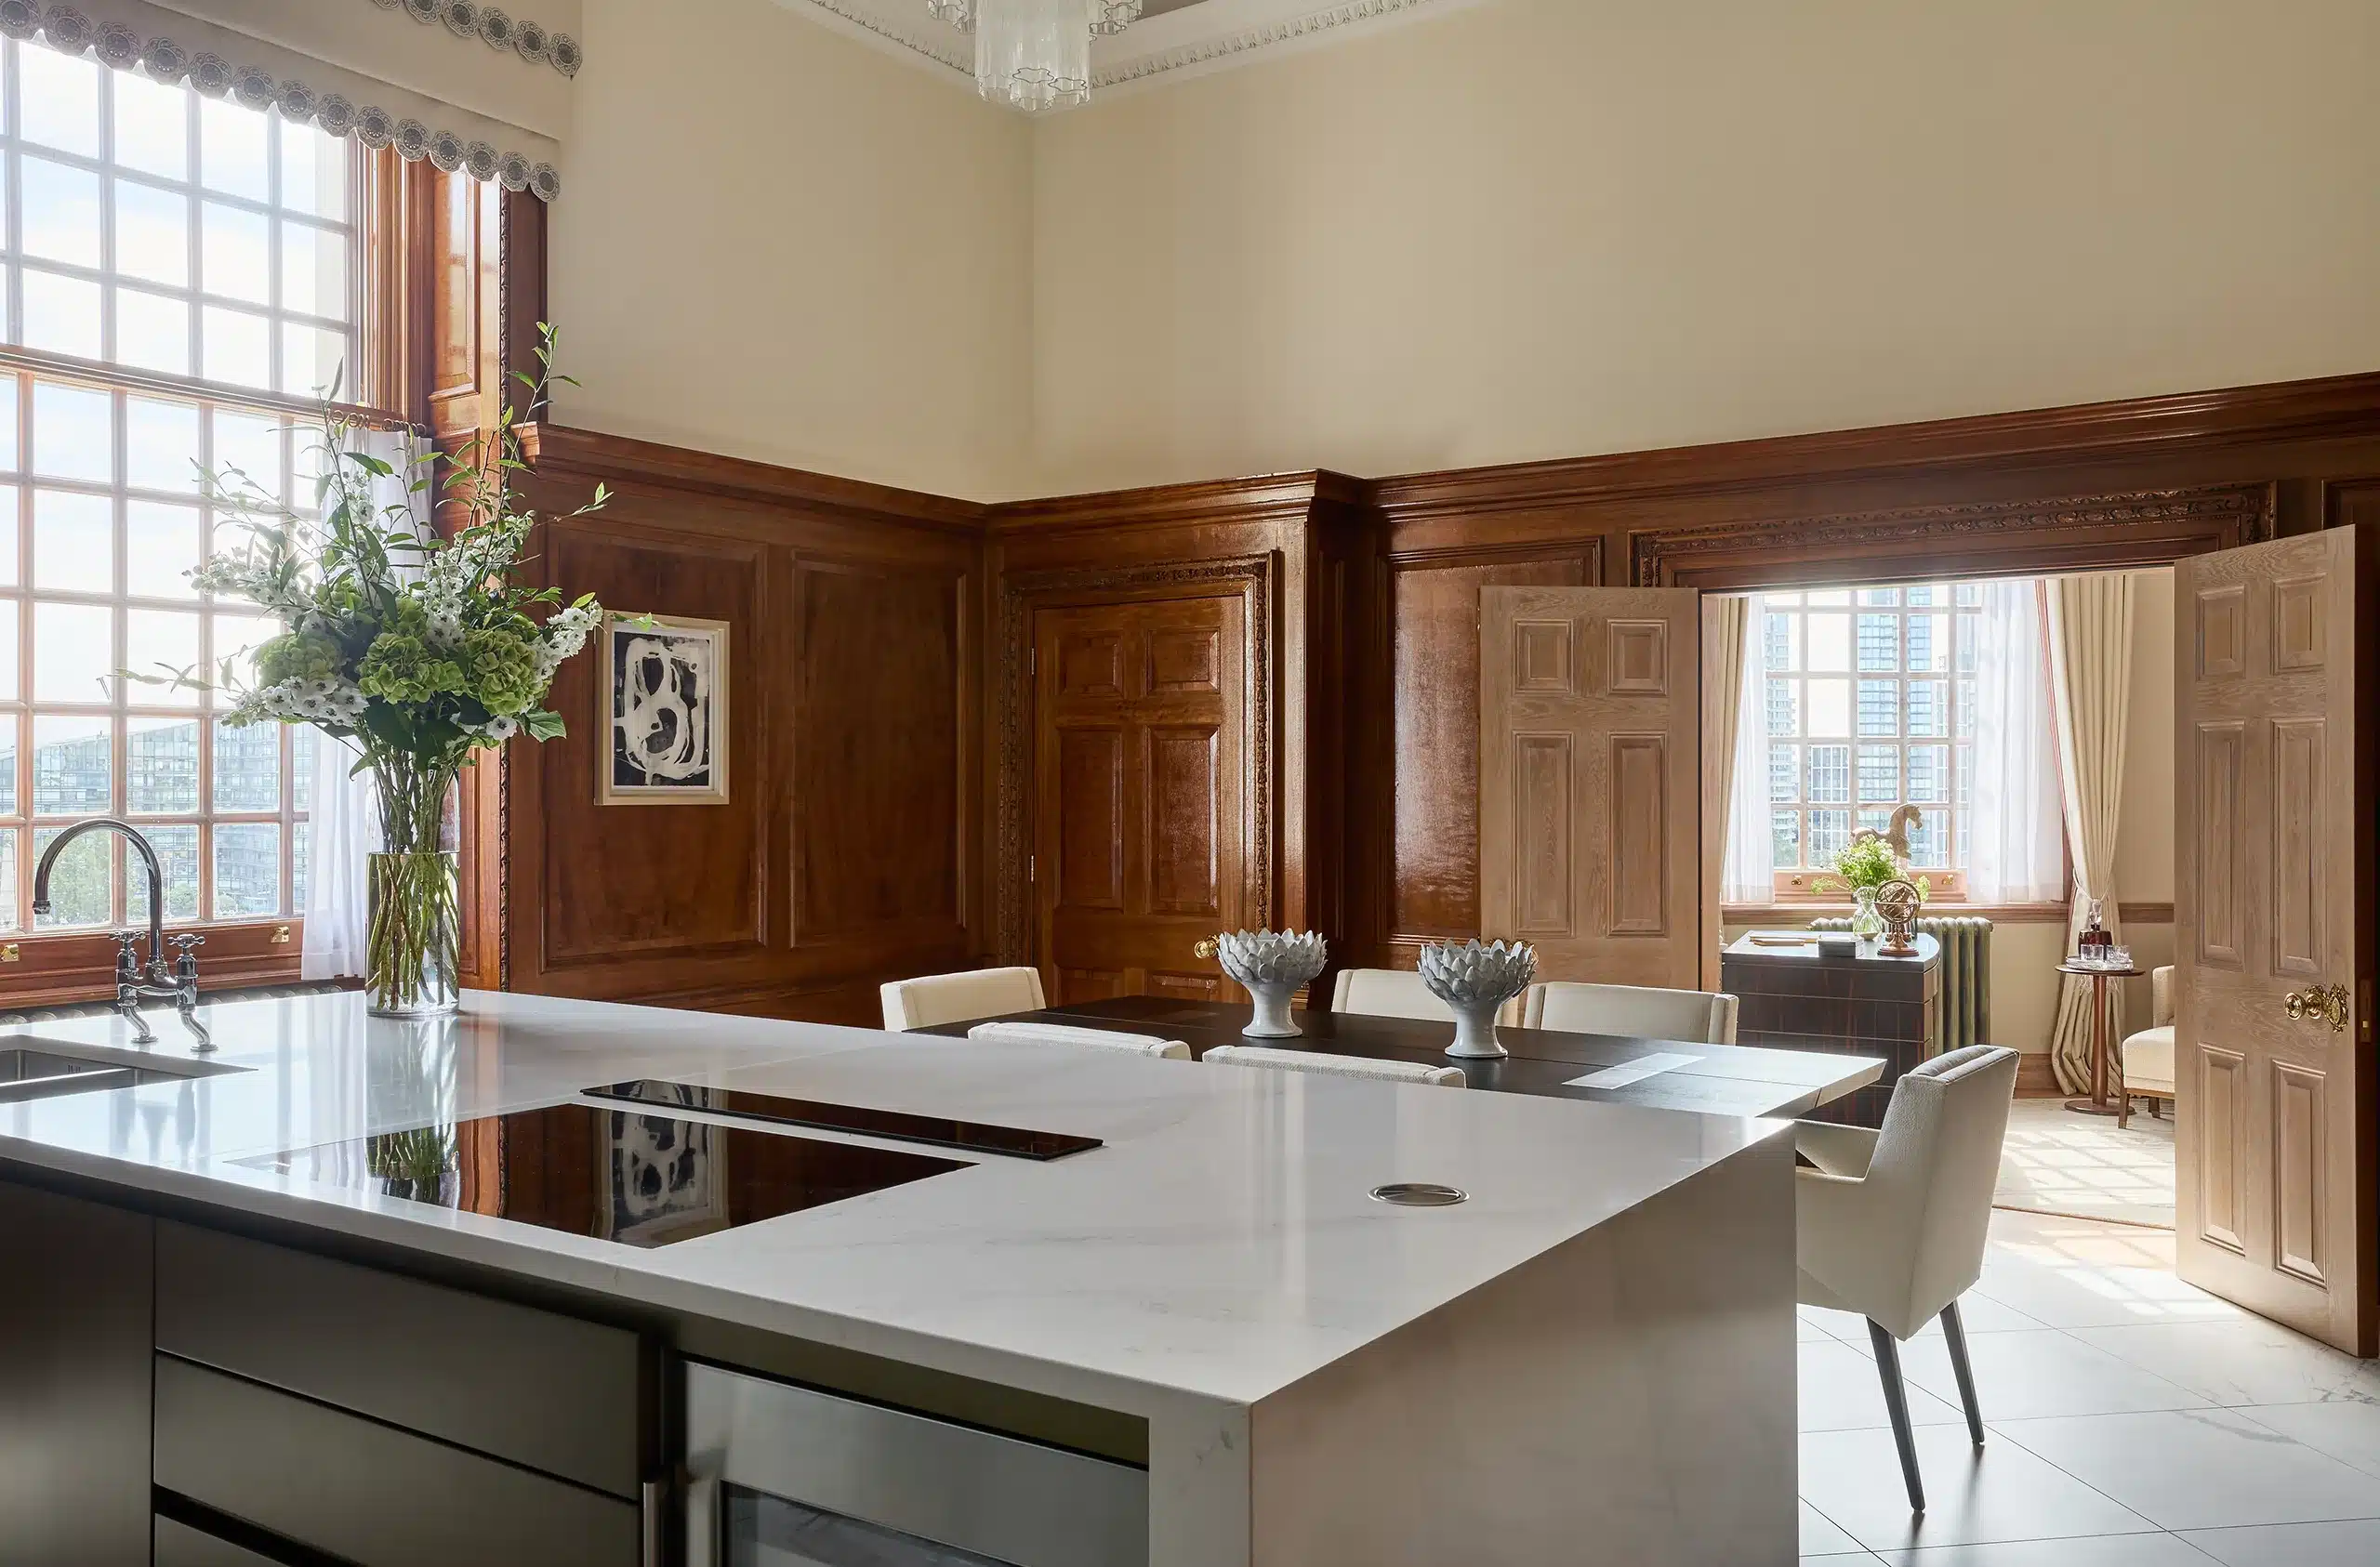 The kitchen at Katharine Pooley's Millbank interior design project in central london, next to westminster